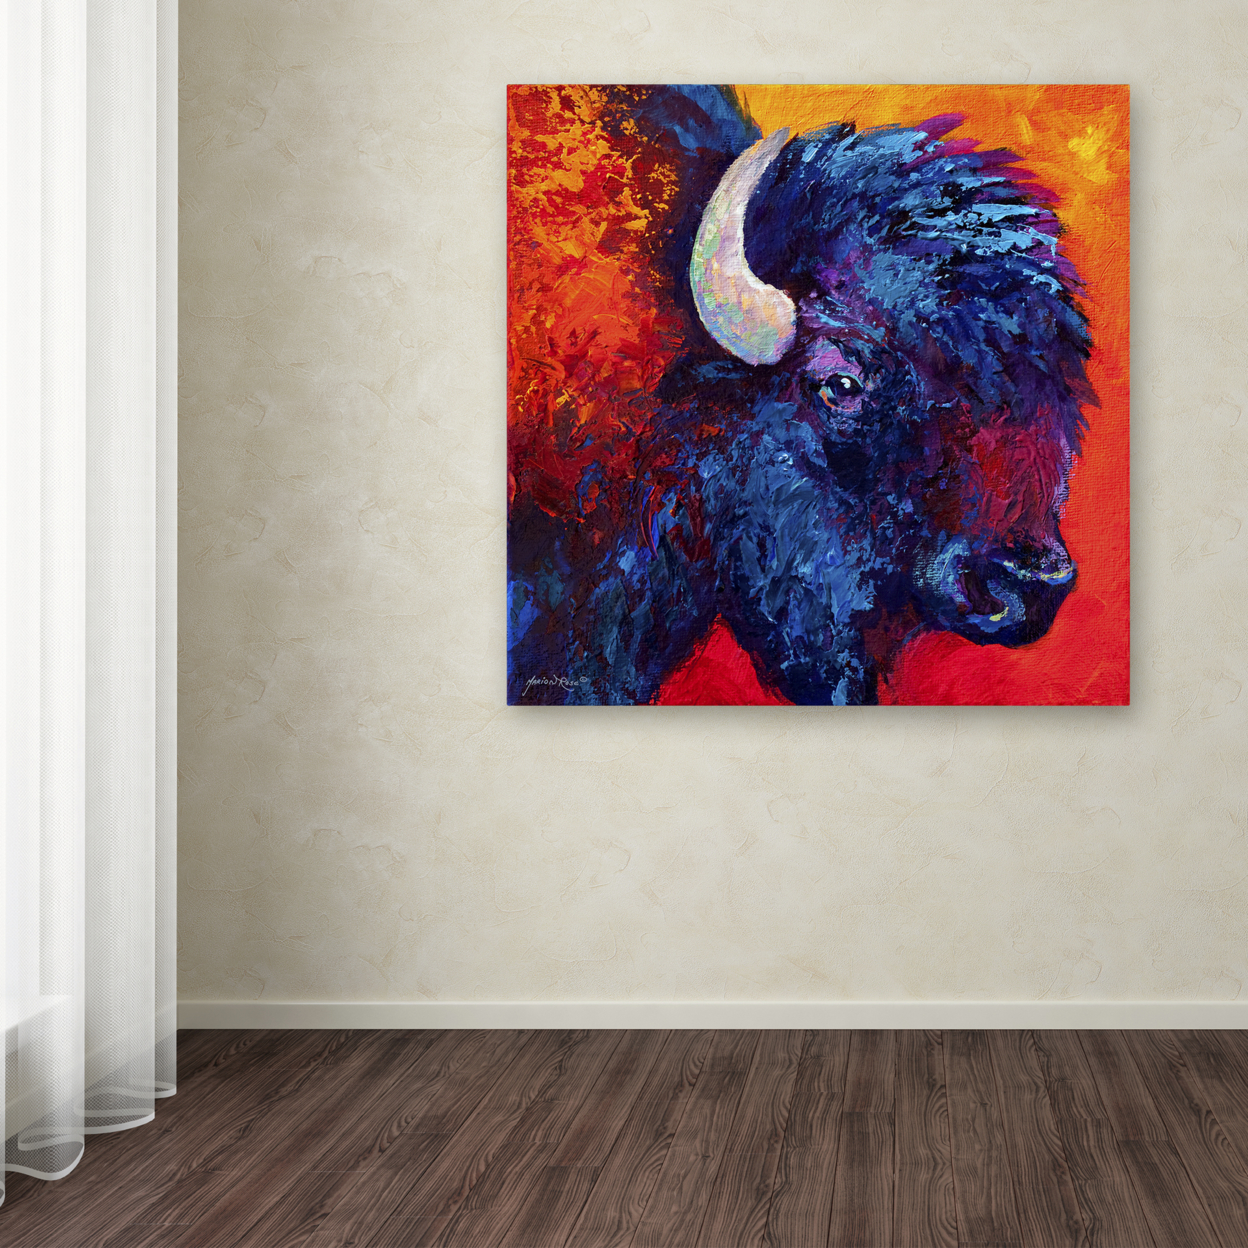 Marion Rose 'Bison Head II' Ready To Hang Canvas Art 24 X 24 Inches Made In USA